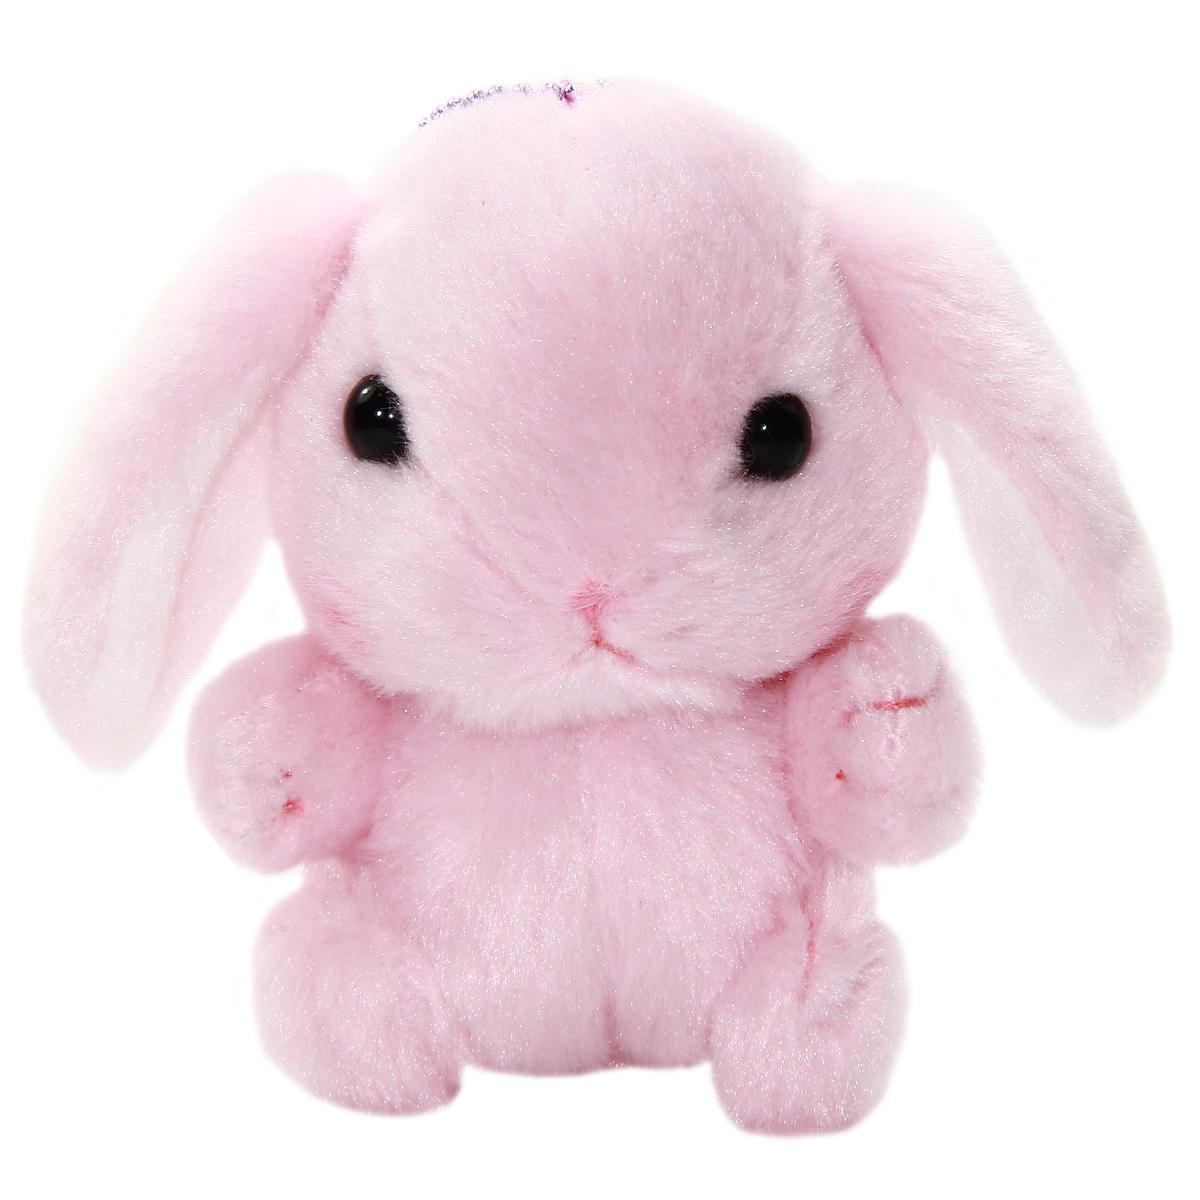 Amuse Bunny Plushie Cute Stuffed Animal Toy Pink 5 Inches